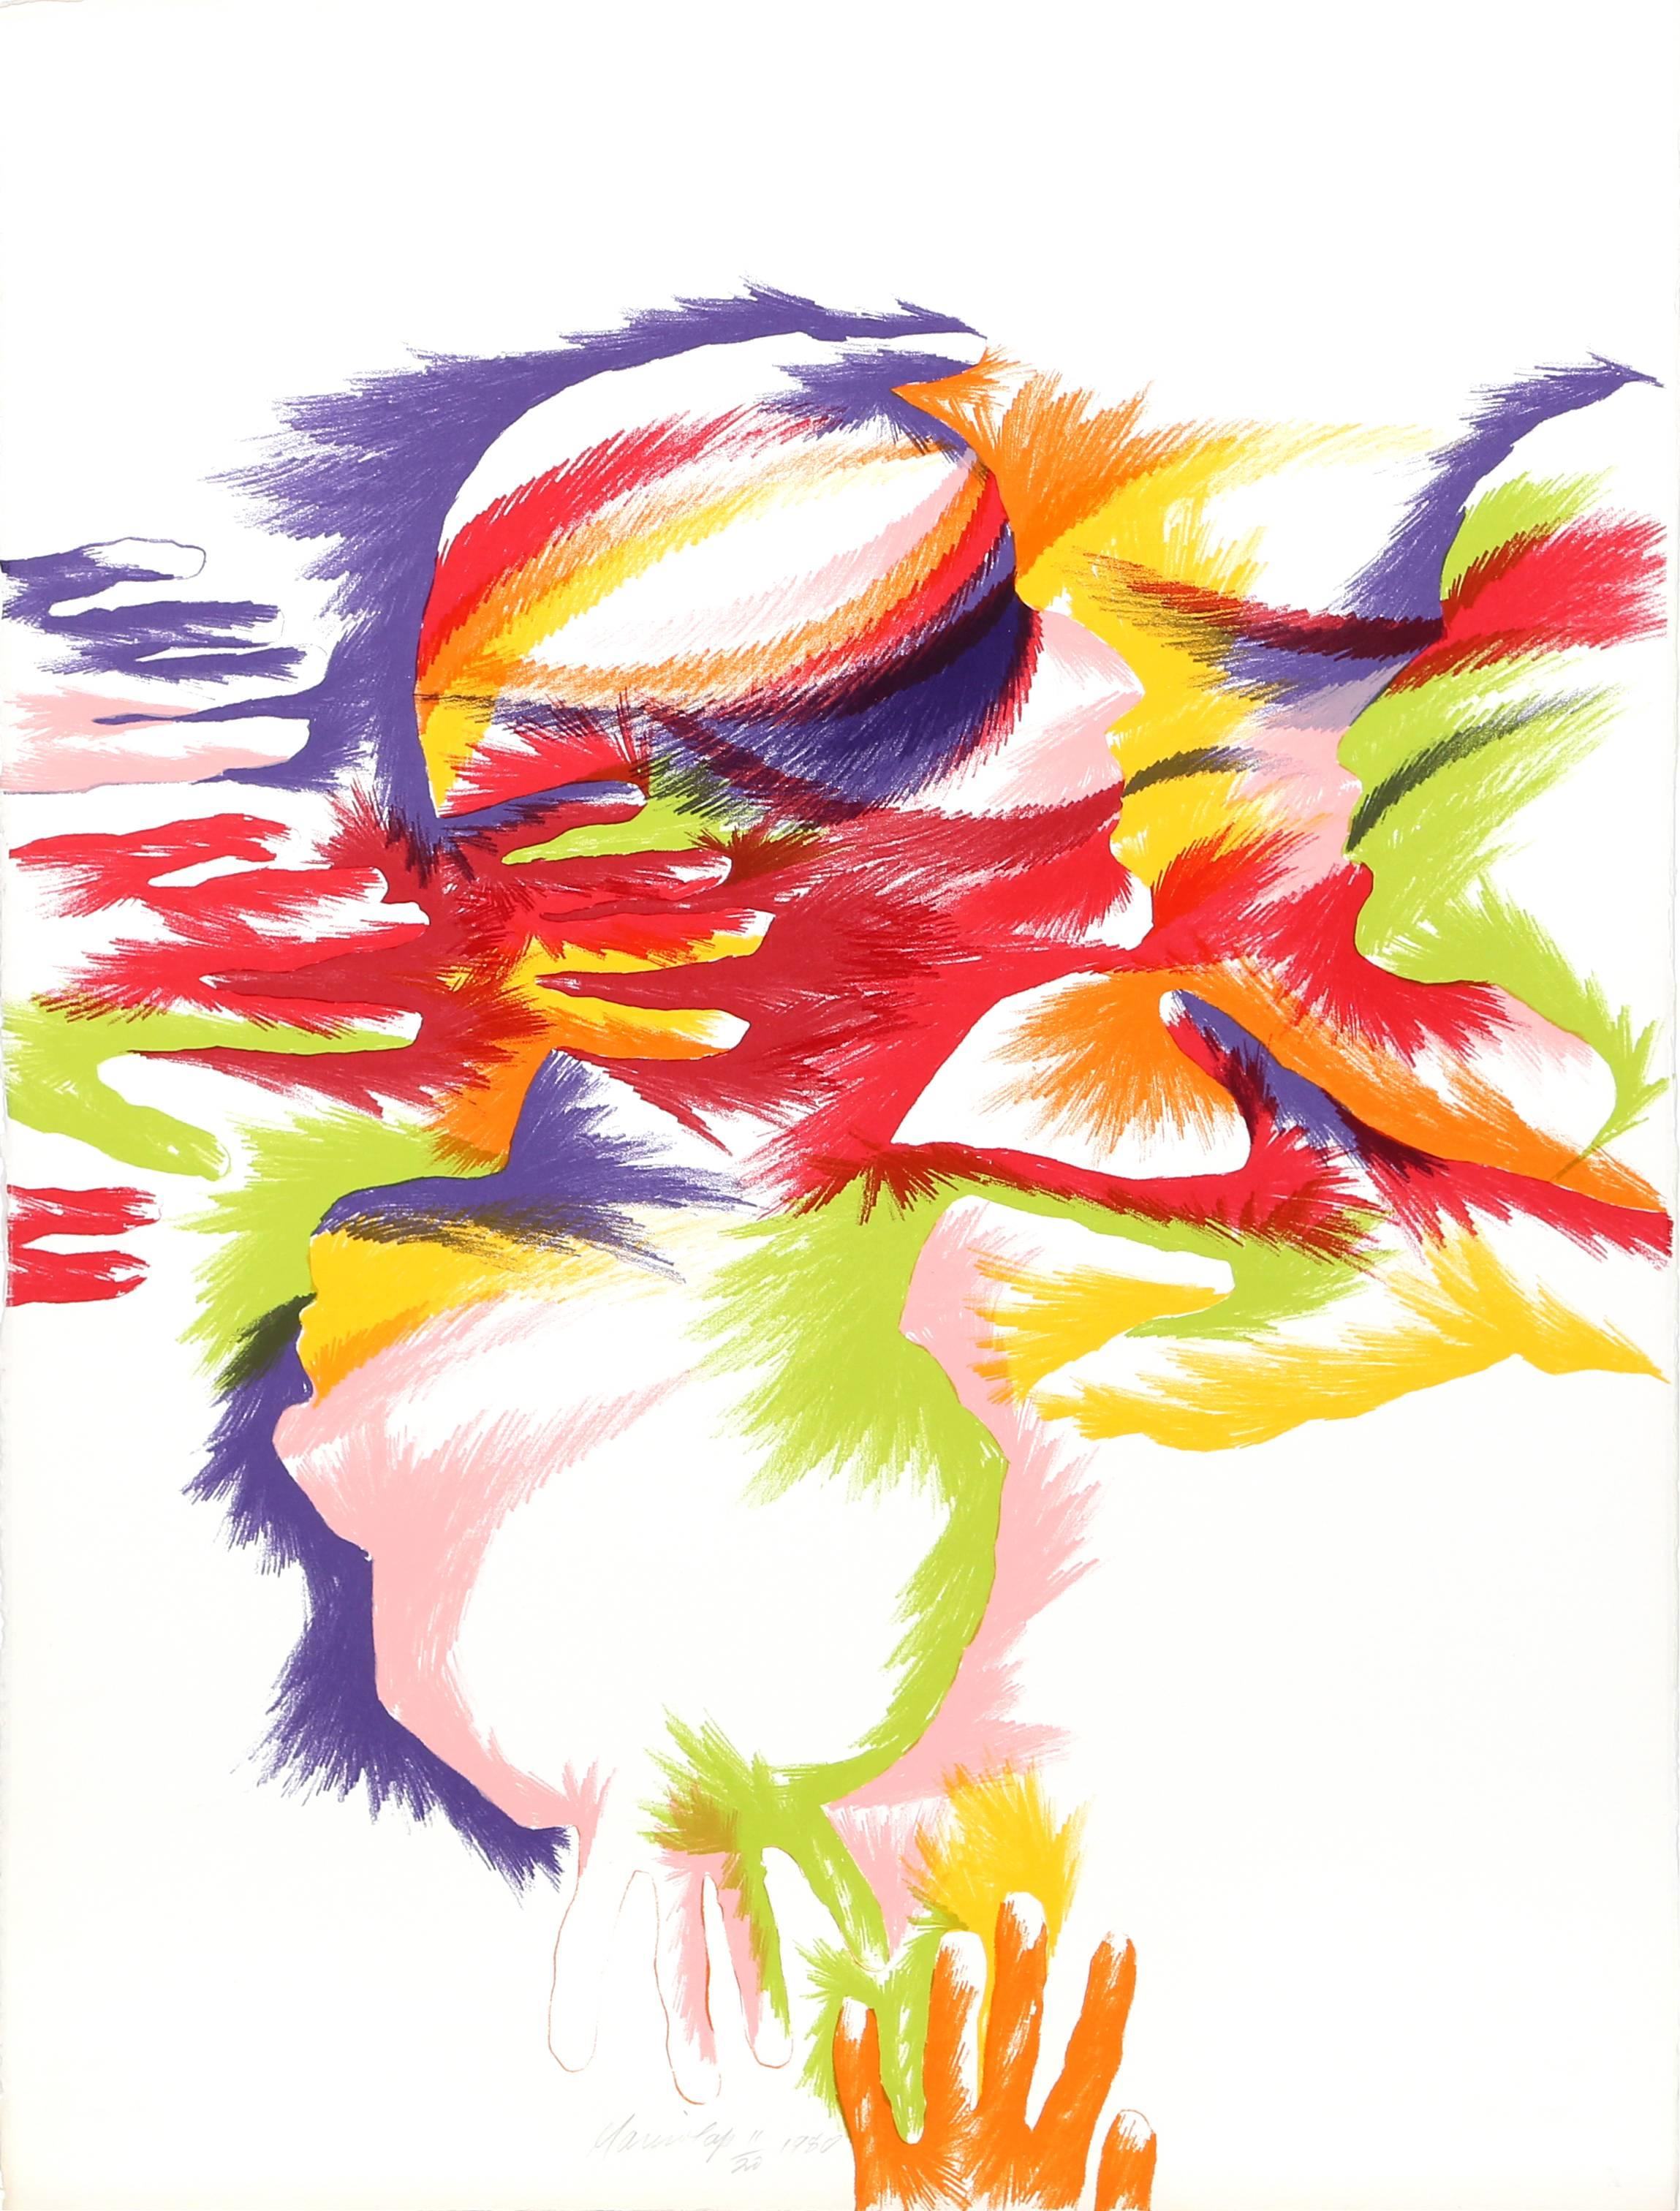 Budding, Psychedelic Lithograph by Marisol Escobar